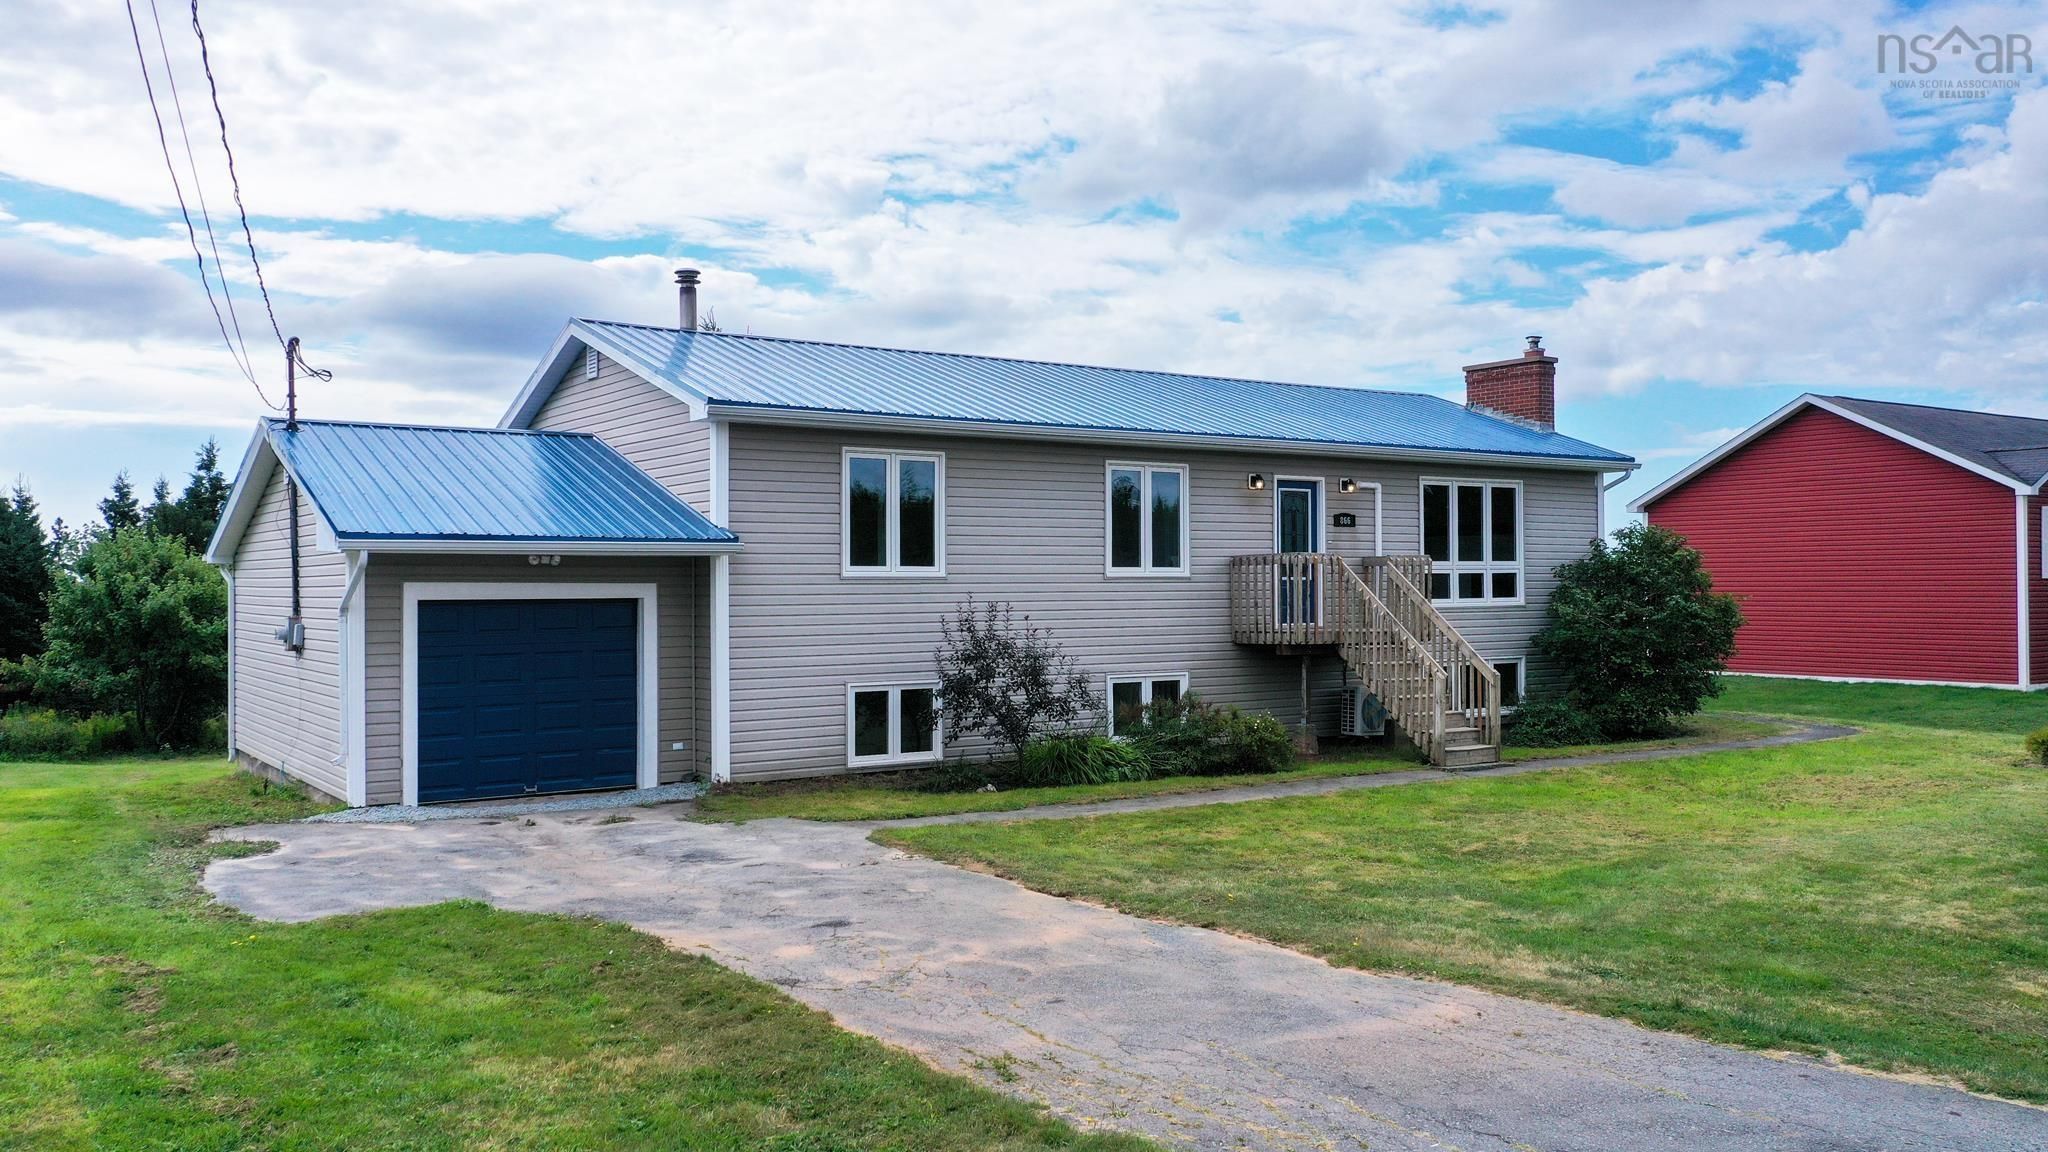 Main Photo: 866 West Lawrencetown Road in Lawrencetown: 31-Lawrencetown, Lake Echo, Port Residential for sale (Halifax-Dartmouth)  : MLS®# 202222116